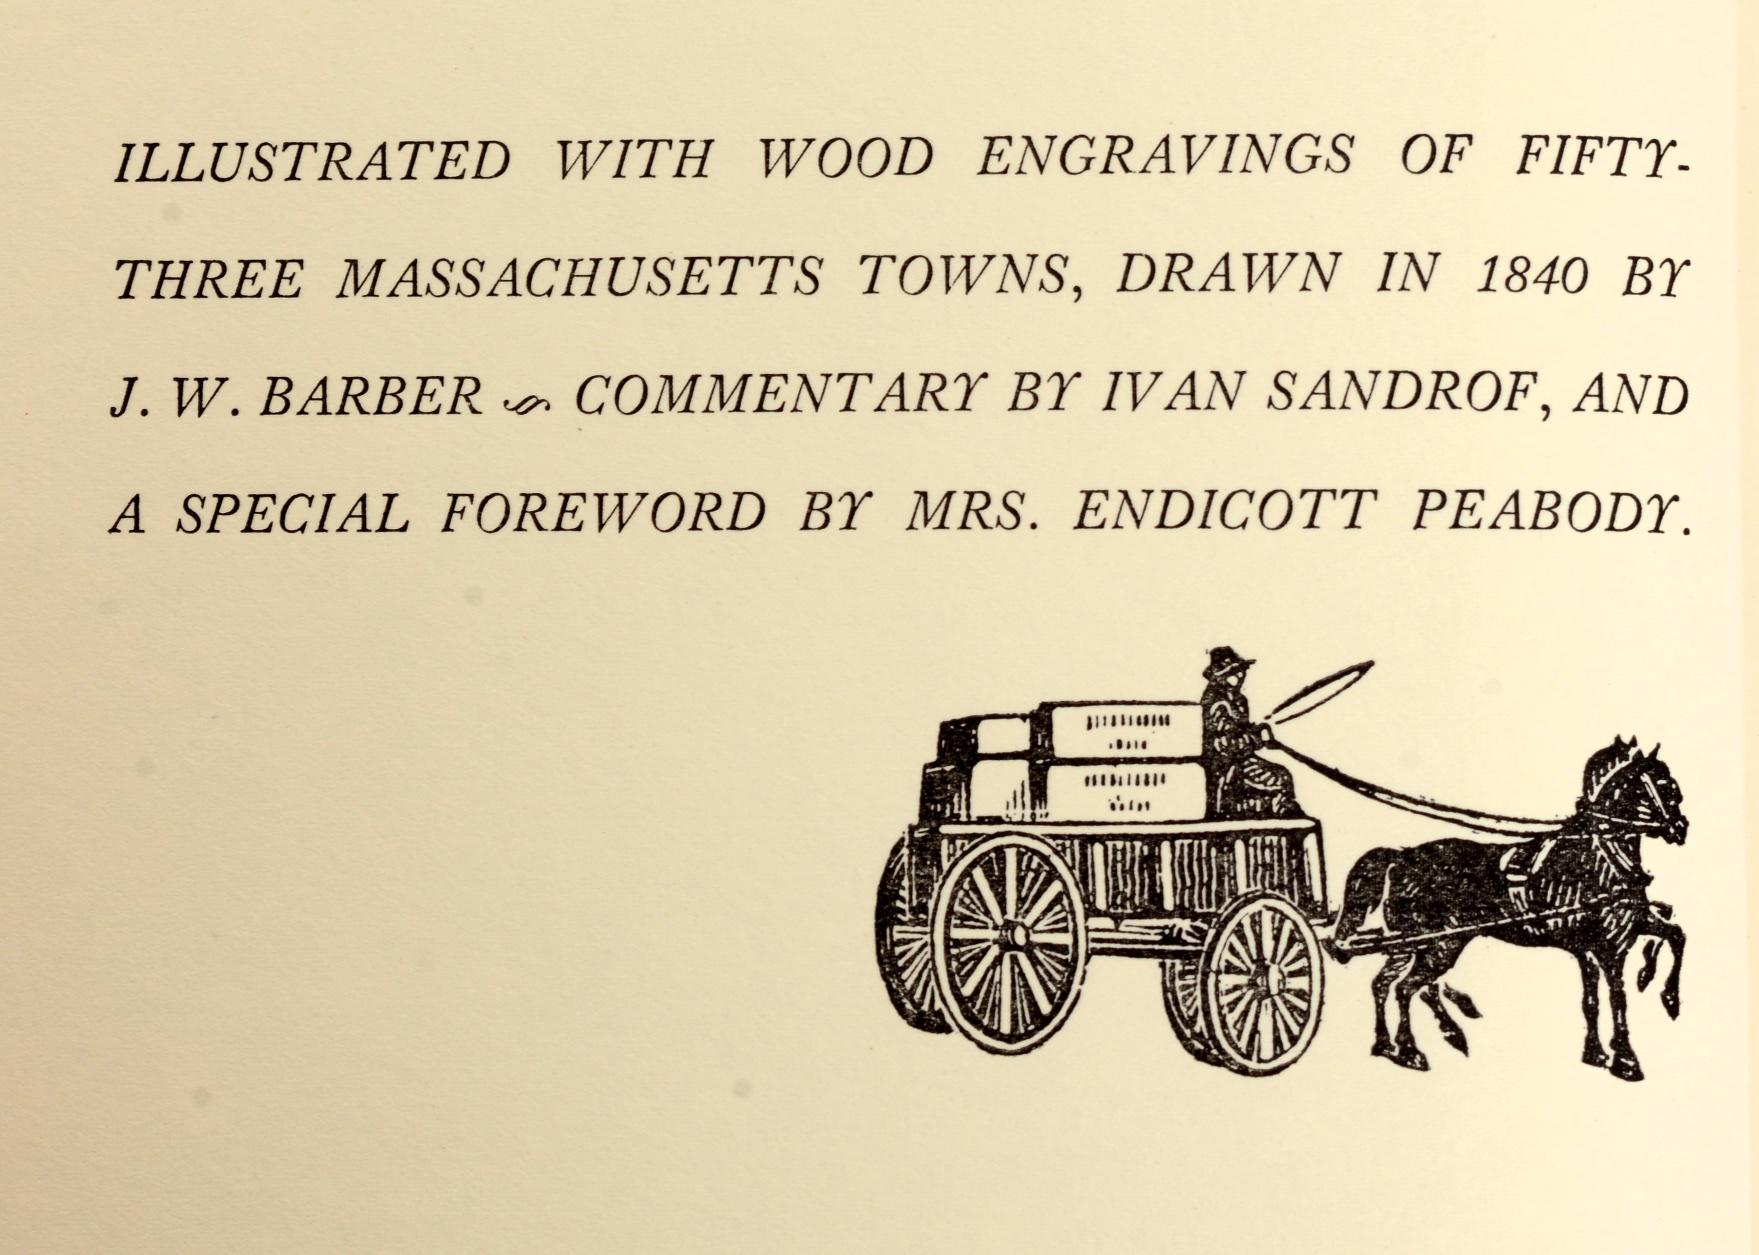 More Massachusetts Towns, illustrated with wood engravings of fifty-three Massachusetts Towns, drawn in 1840 by J. W. Barber. Commentary by Ivan Sandrof, and a special foreword by Mrs. Endicott Peabody. Barre Publishing, Barre, Massachusetts, 1965.